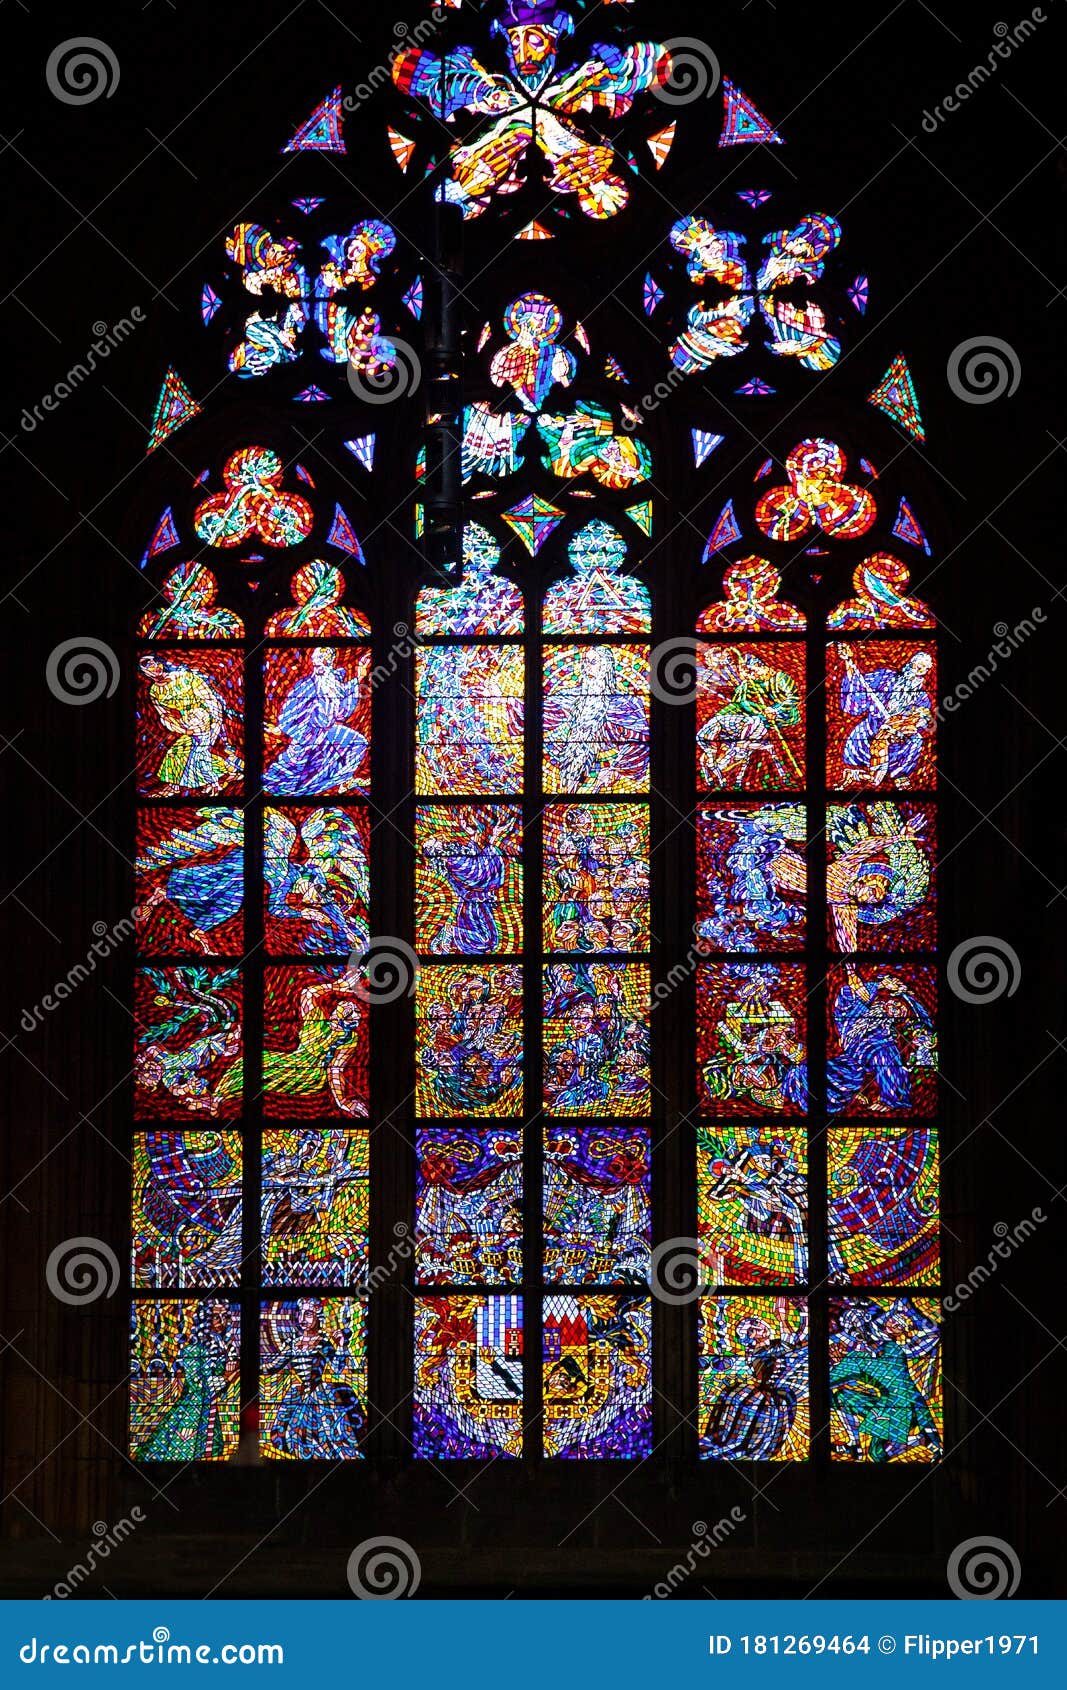 Colored Stained Glass Windows of a Medieval Gothic Cathedral Stock